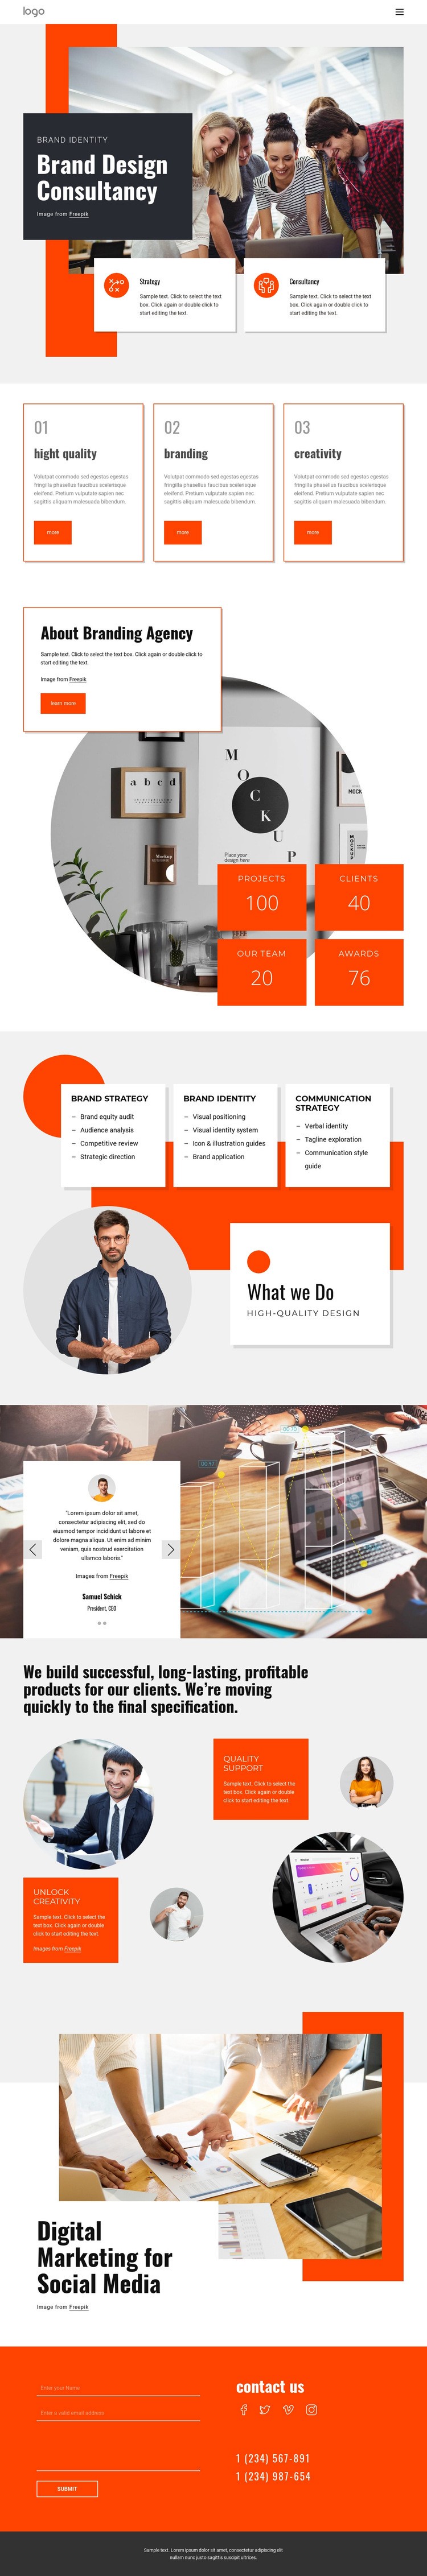 Growth design agency Homepage Design